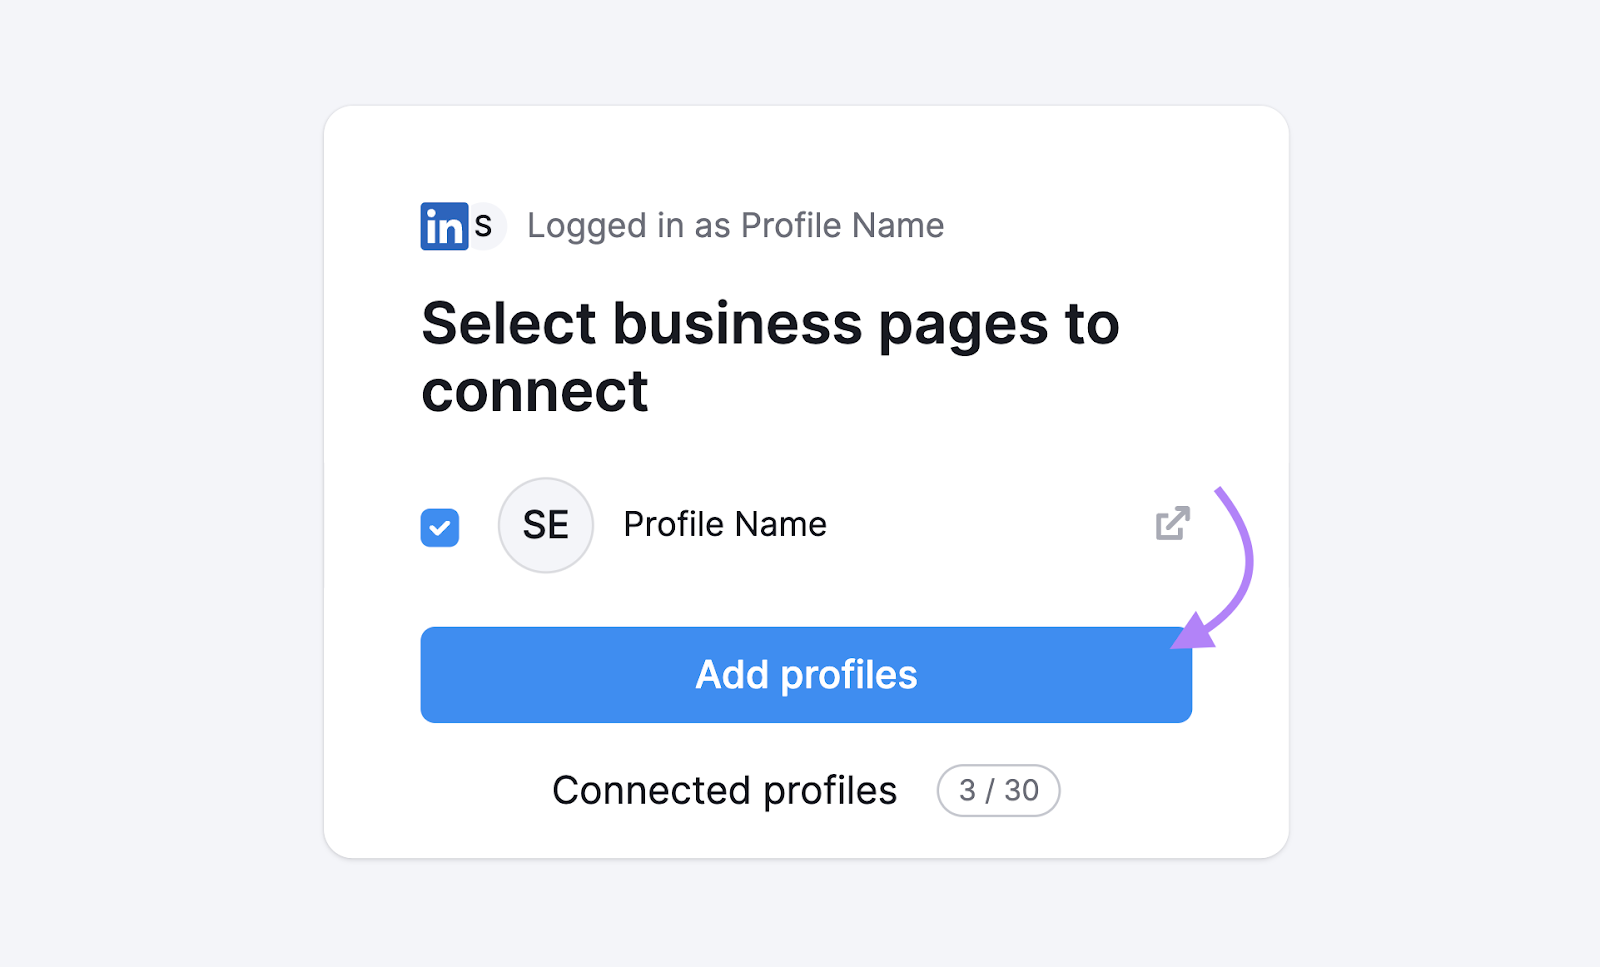 "Add profiles" button under LinkedIn pop-up window in Social Poster tool